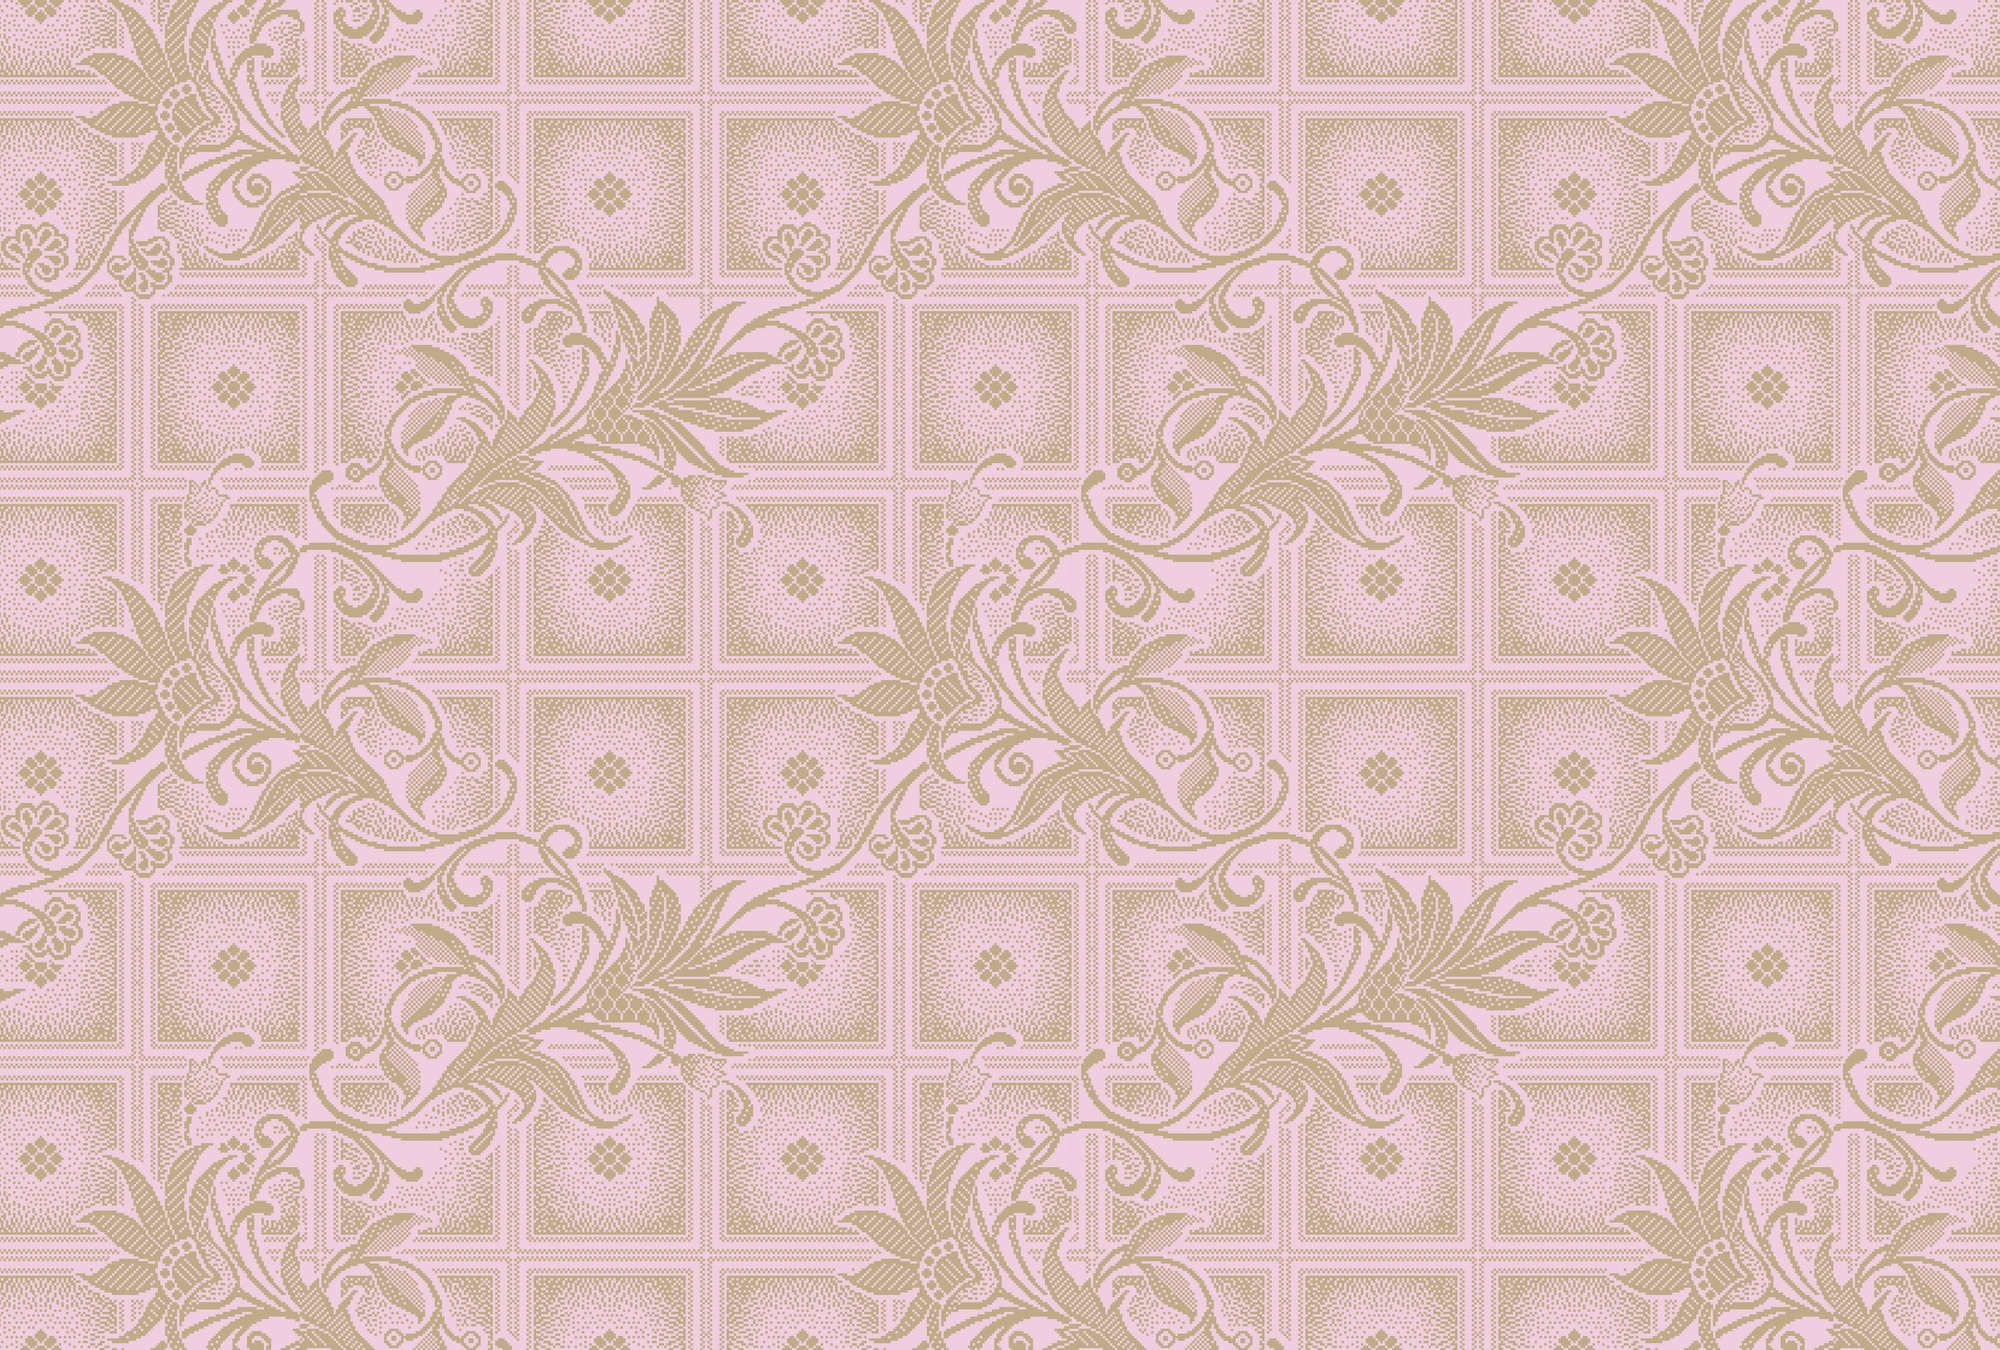             Photo wallpaper »vivian« - Pixel style squares with flowers - Pink | Light textured non-woven
        